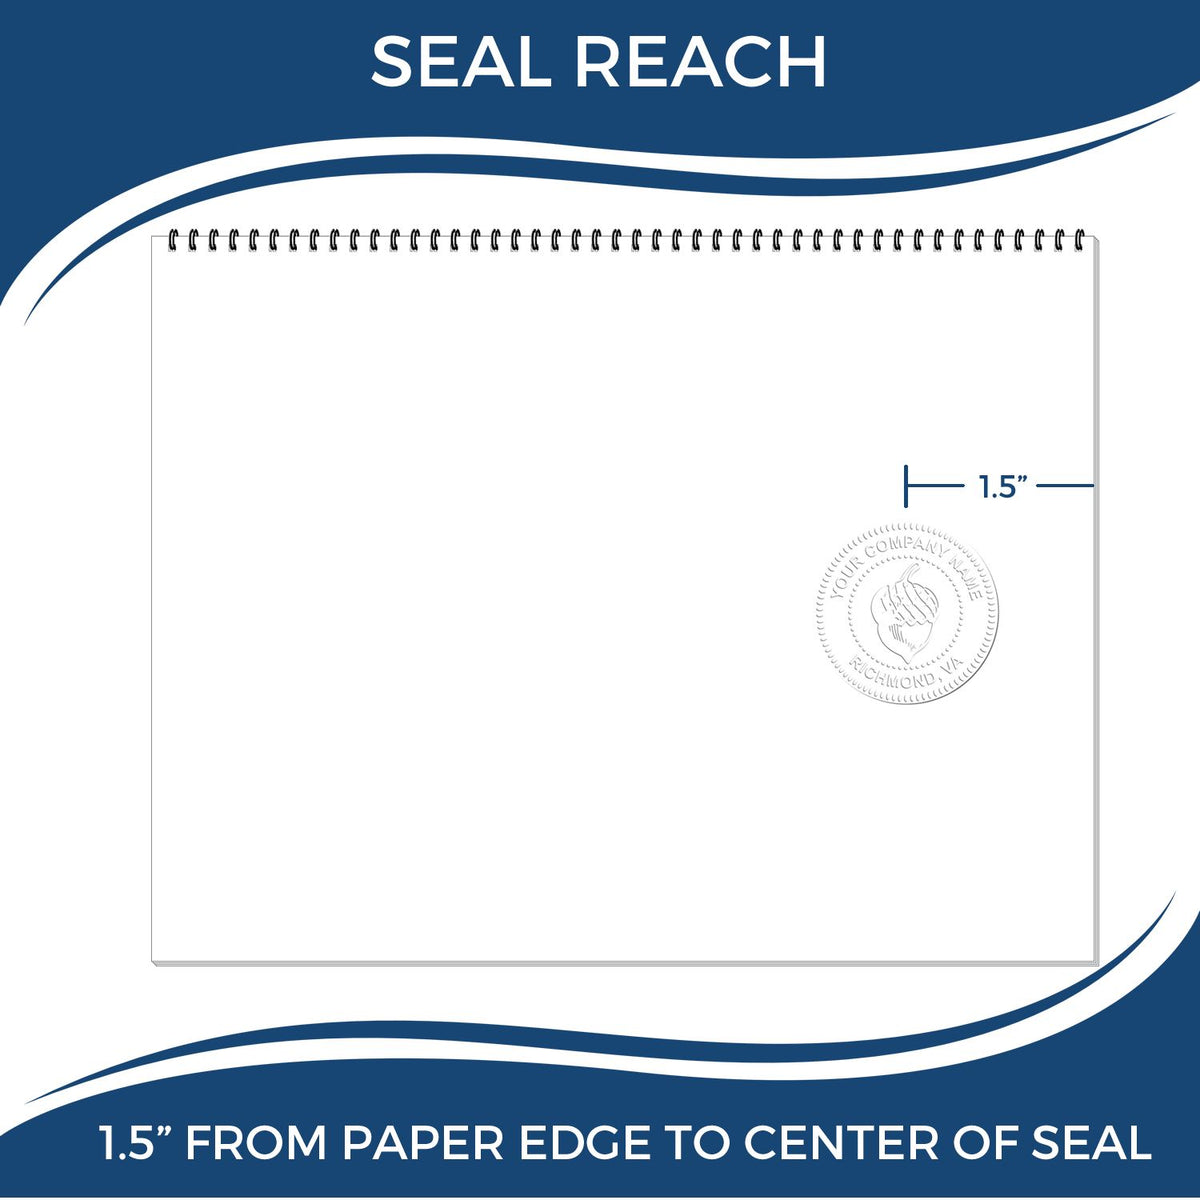 An infographic showing the seal reach which is represented by a ruler and a miniature seal image of the Hybrid New Hampshire Land Surveyor Seal